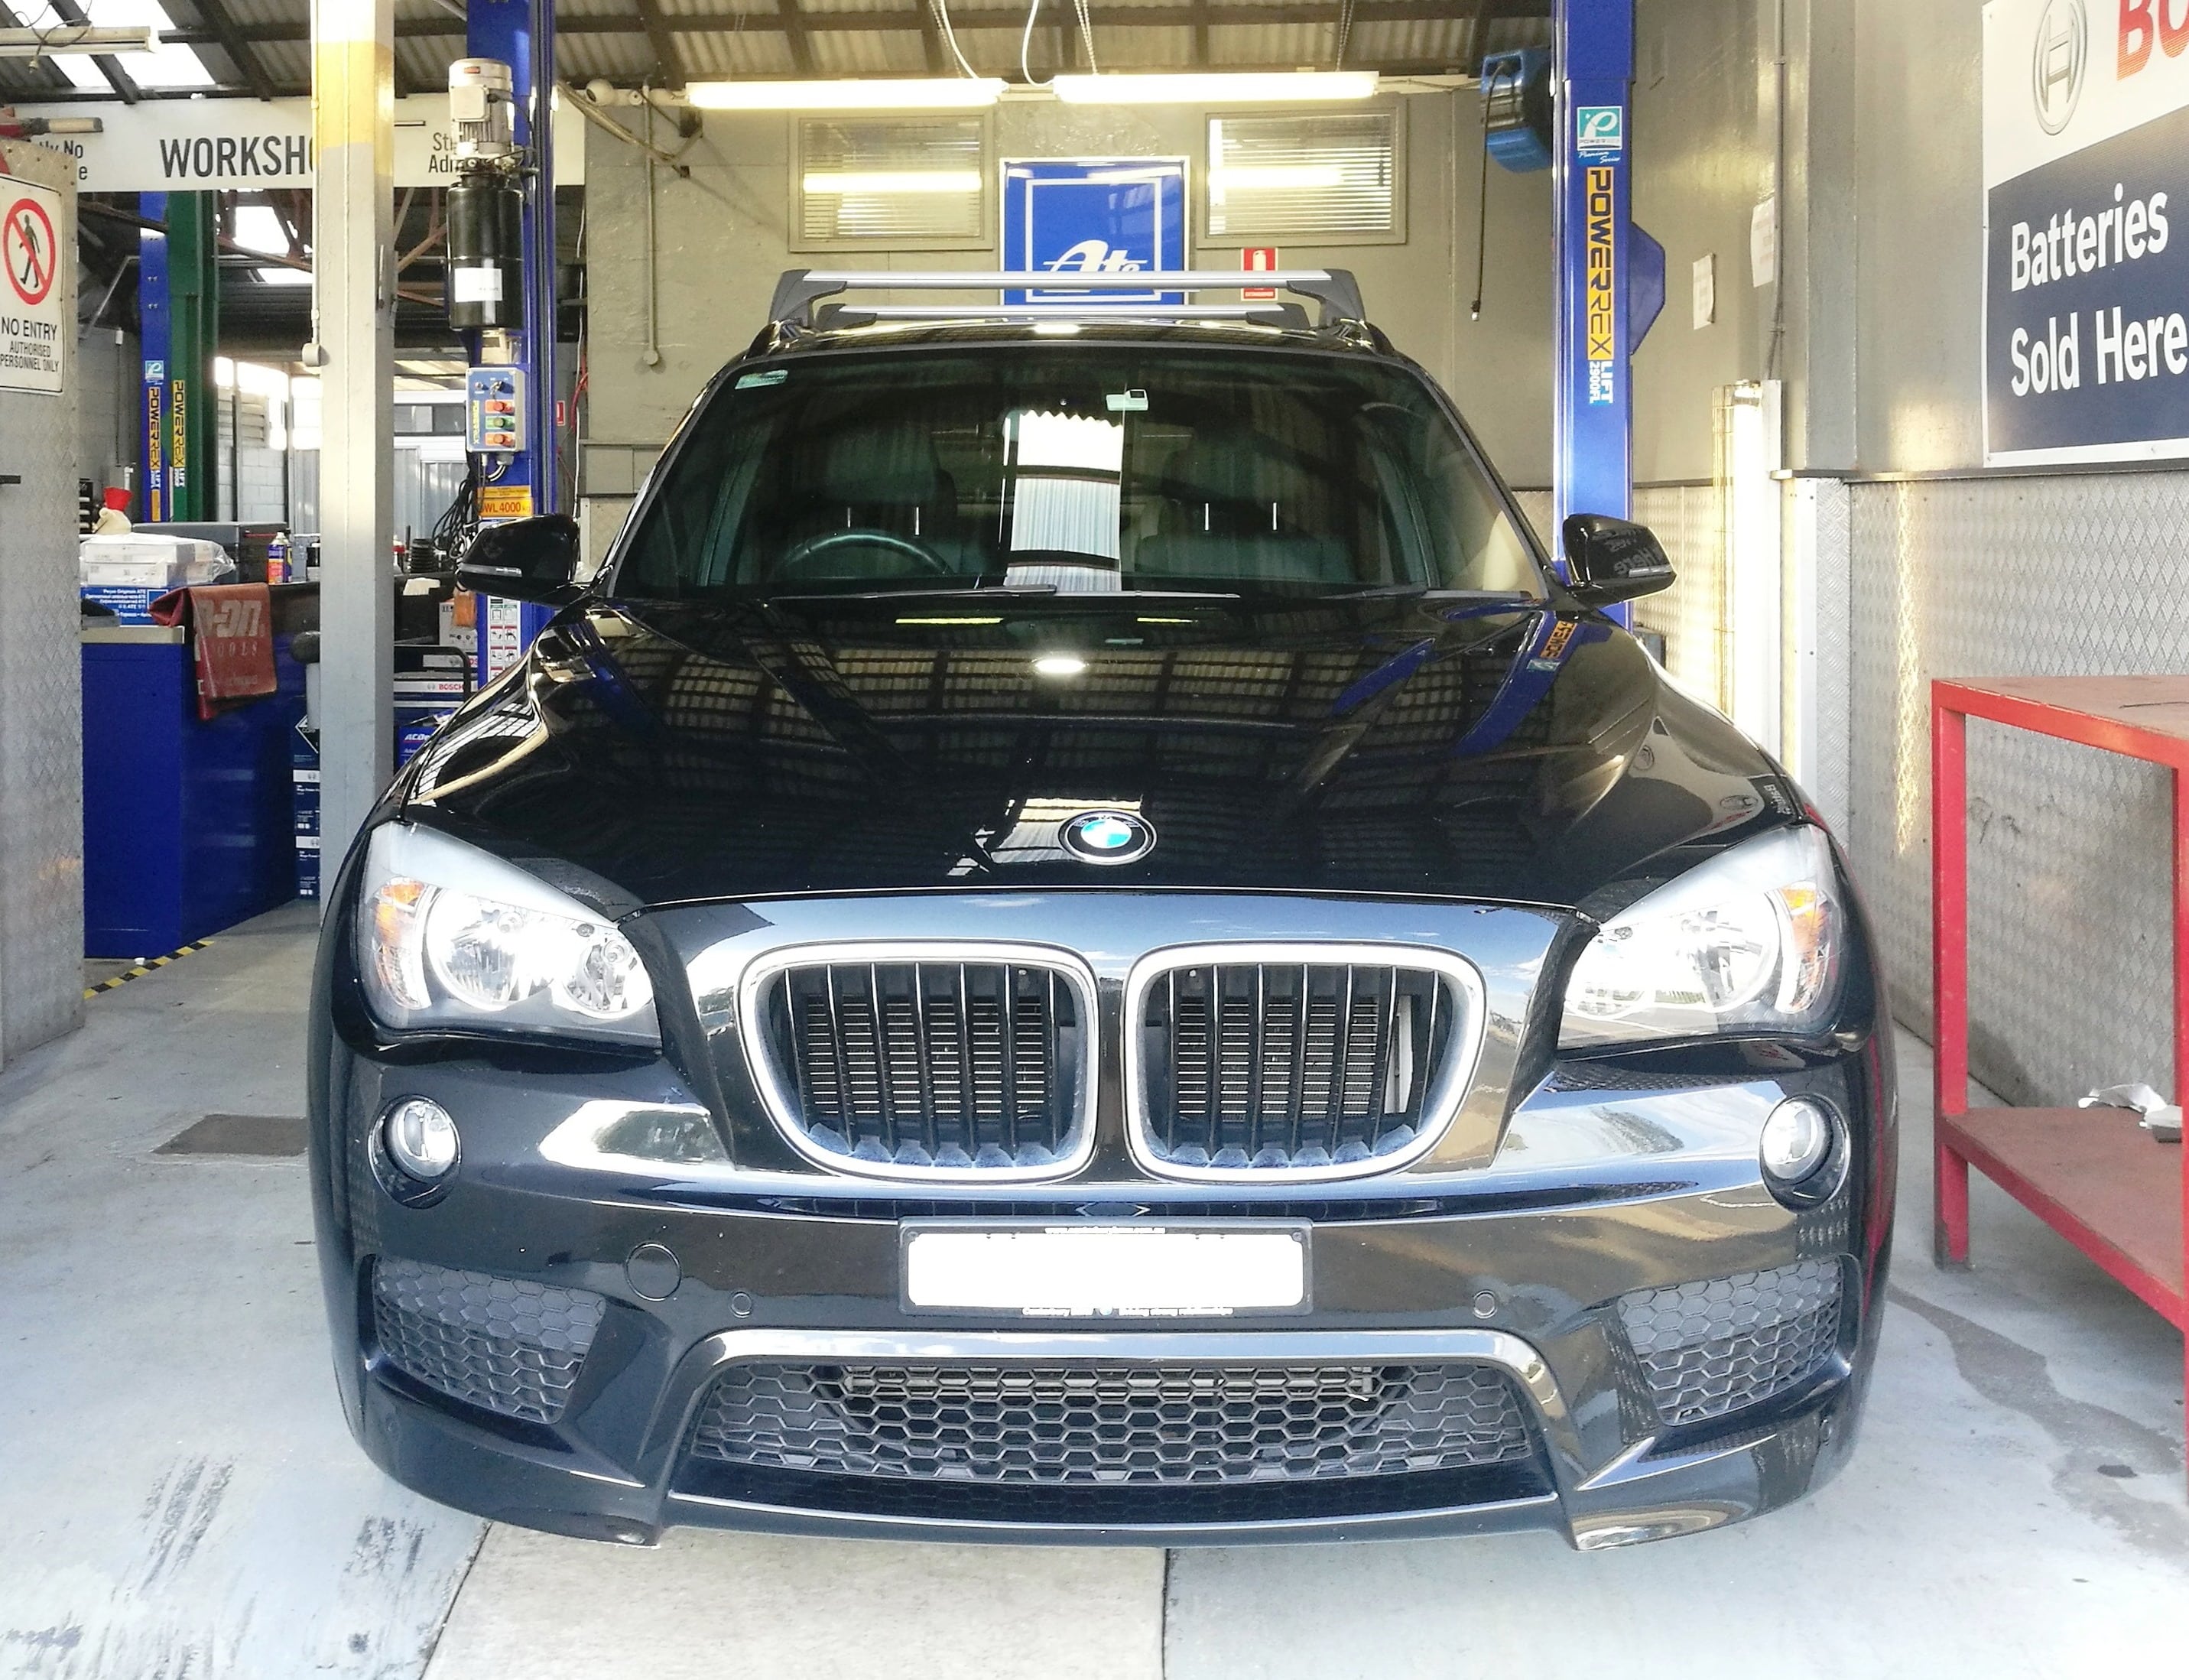 BMW Front View